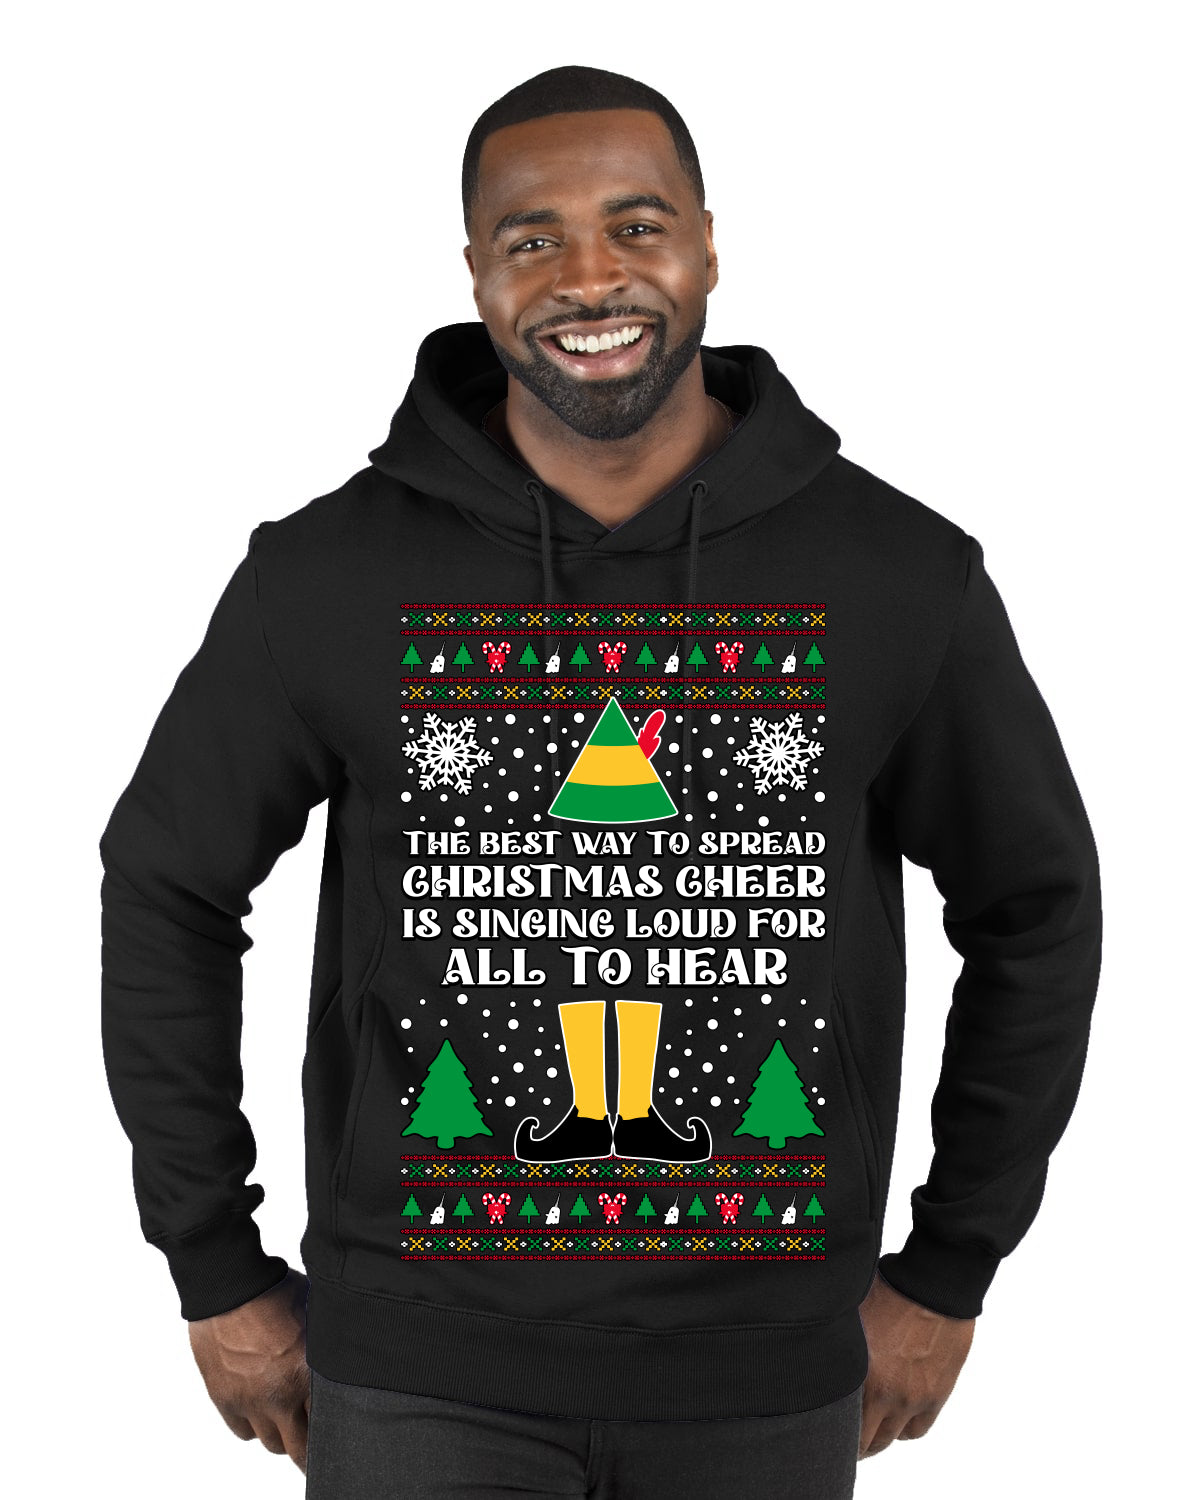 Spread Christmas Cheer Sing Loud For All To Hear Ugly Christmas Sweater Premium Graphic Hoodie Sweatshirt